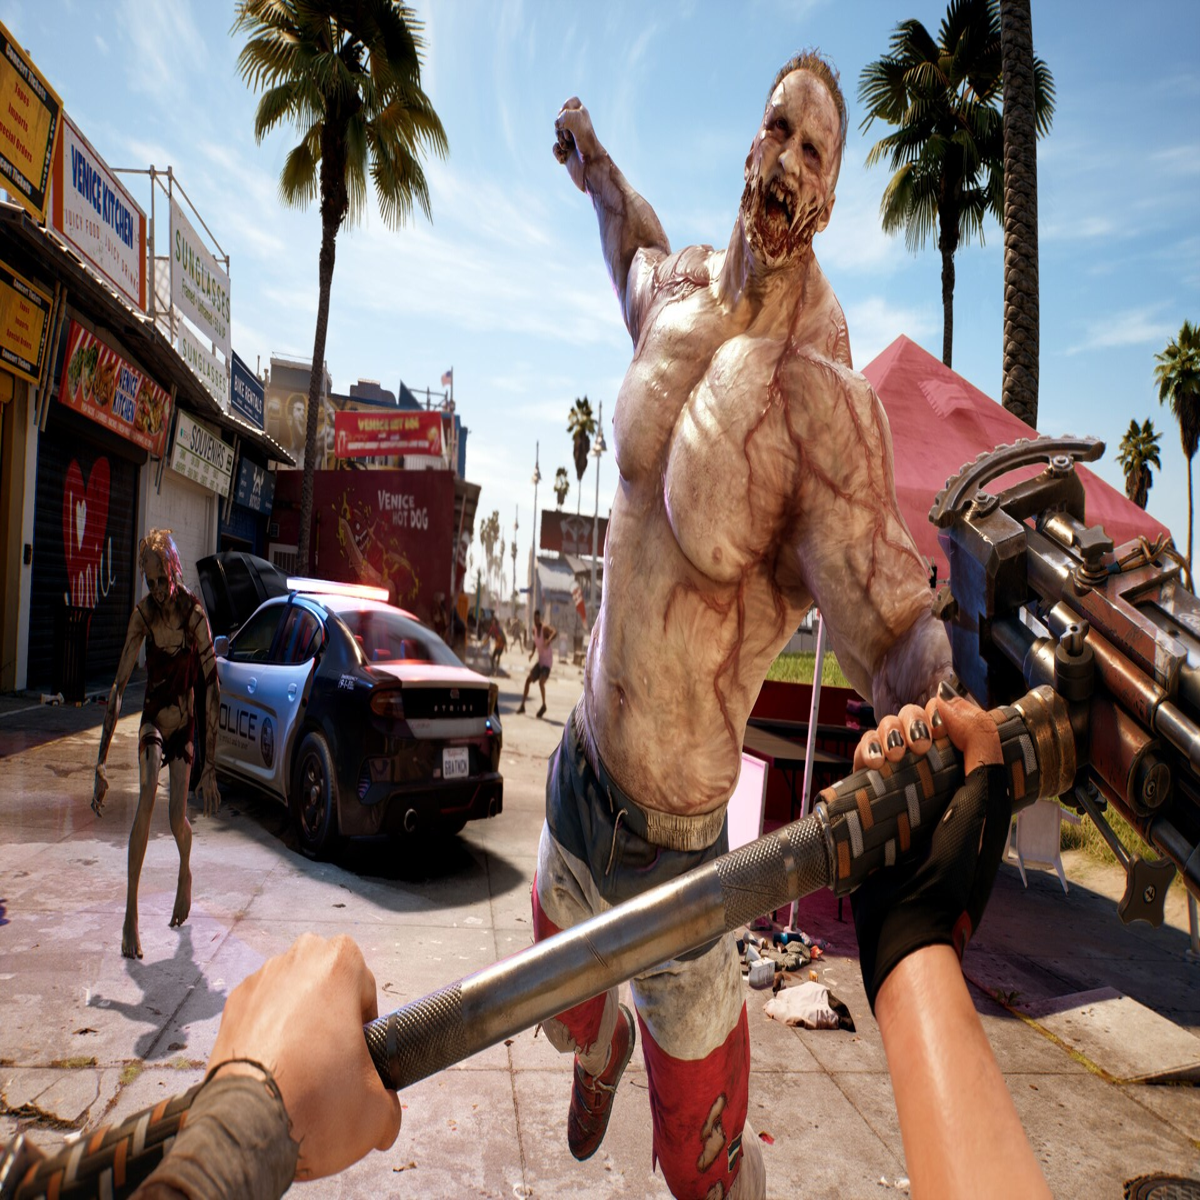 Dead Island 2 PC all graphics settings explained